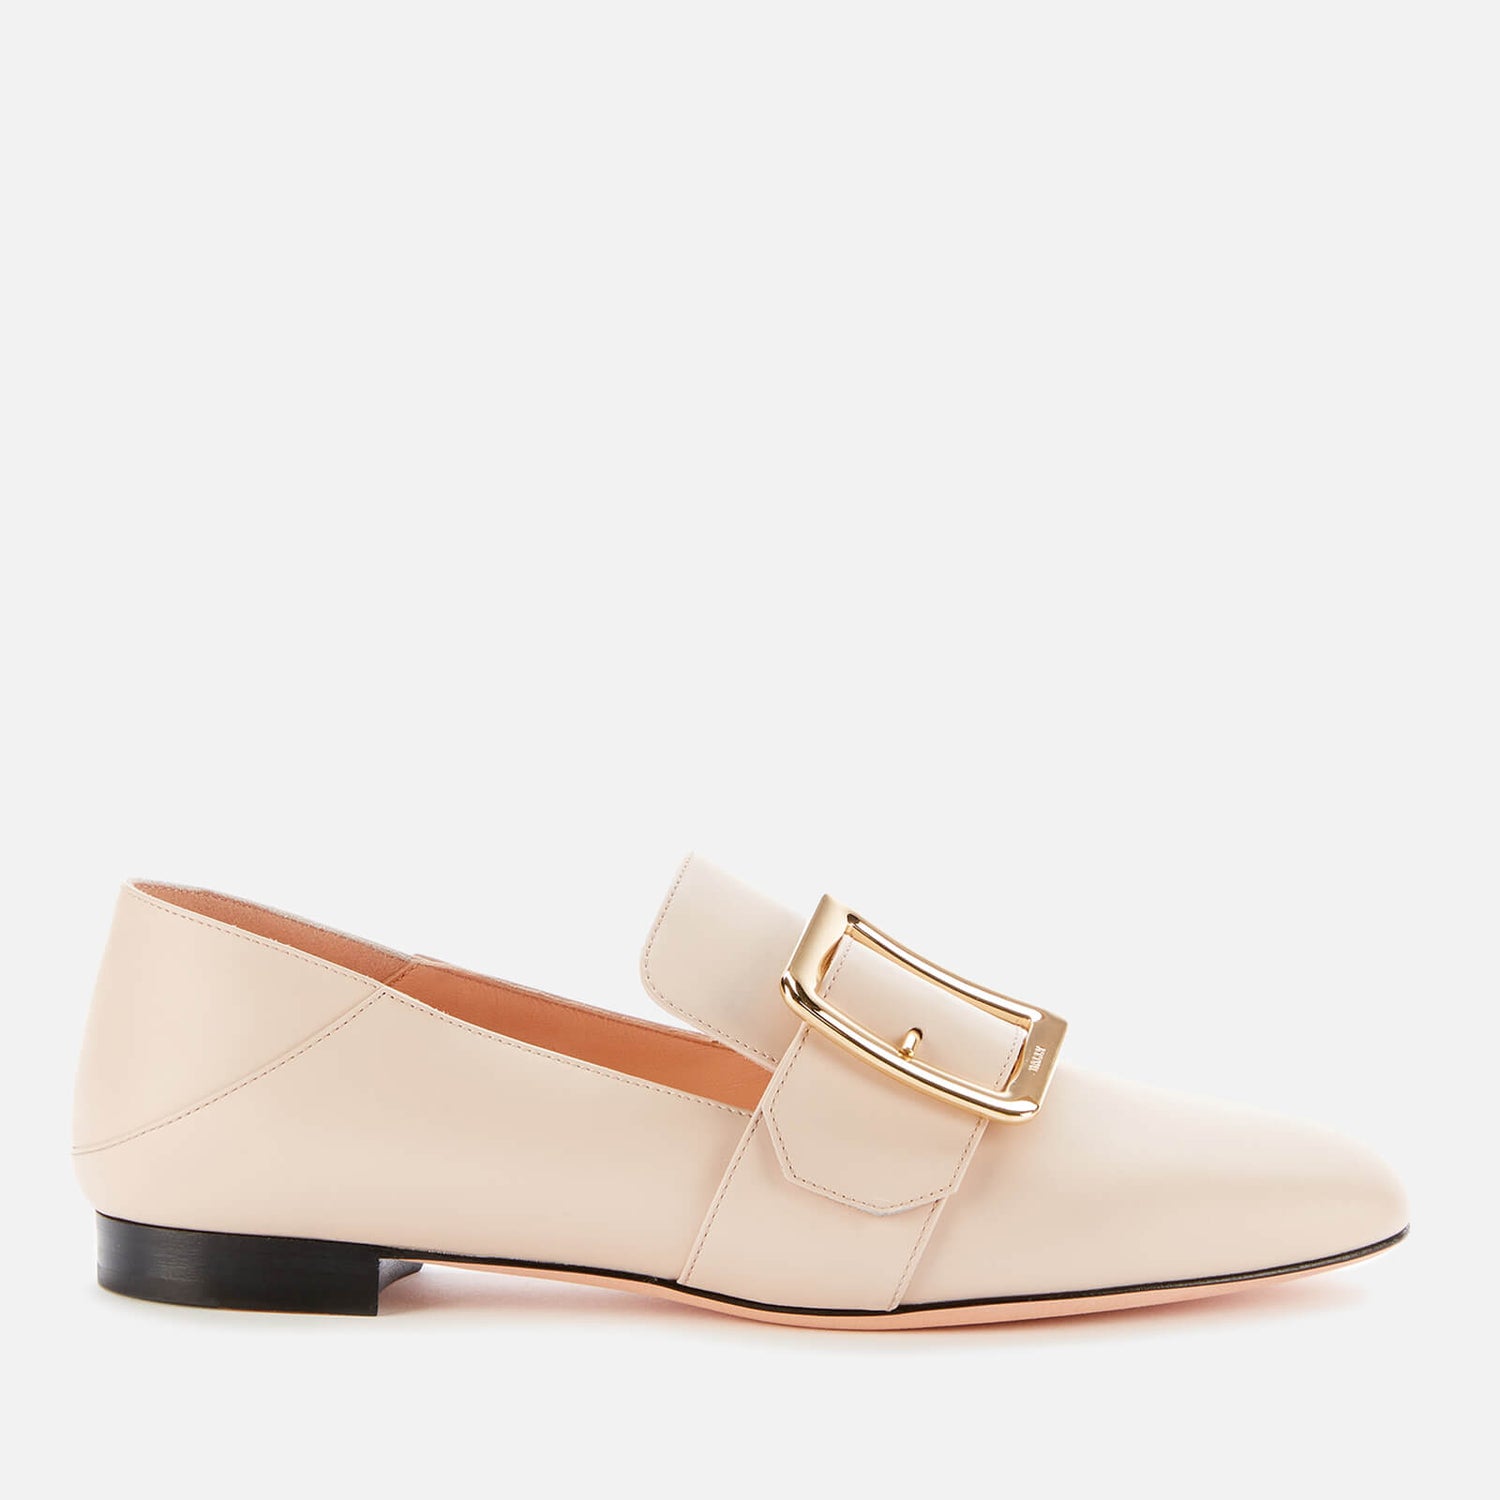 Bally Women's Janelle Leather Loafers - Poudre - Free UK Delivery Available